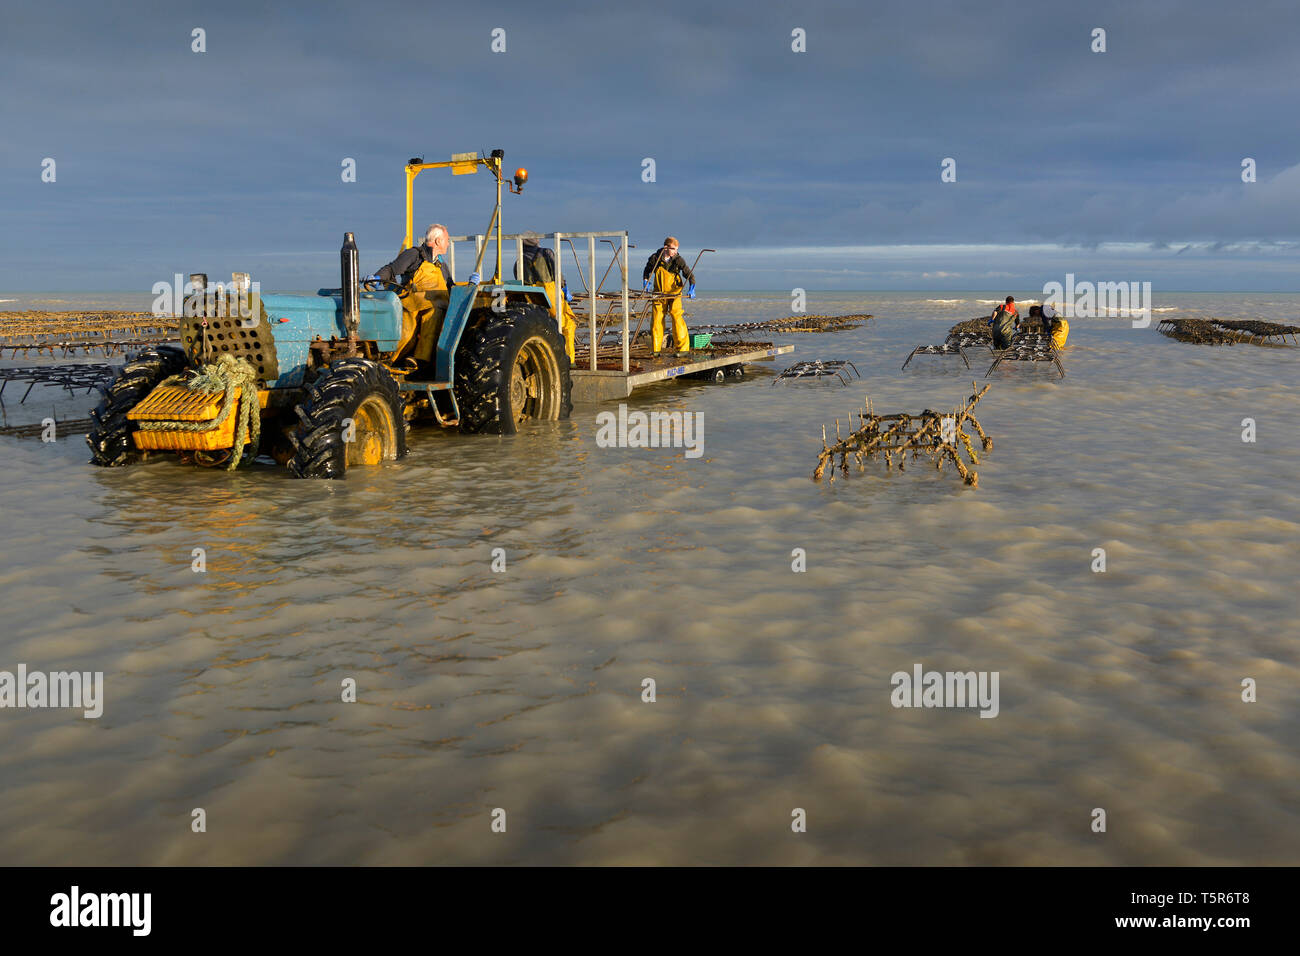 Oysters from Veules-les-Roses (Normandy, northern France), on the 'Cote d'Albatre' (Norman coast). Oyster farmers in the middle of oyster beds *** Loc Stock Photo